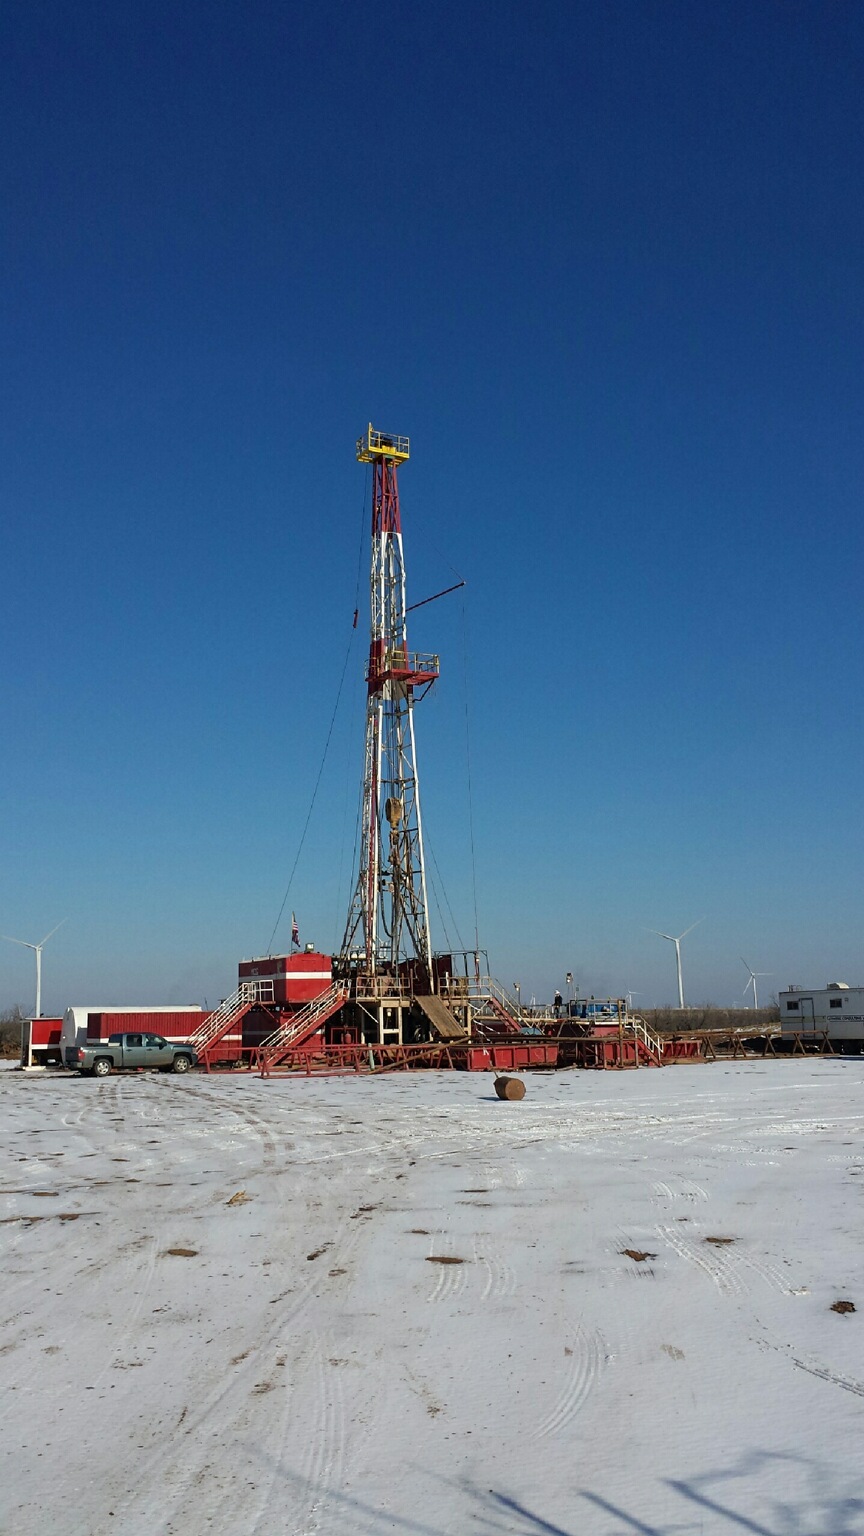 Hinson # 1 Well - Drill Rig February 2014